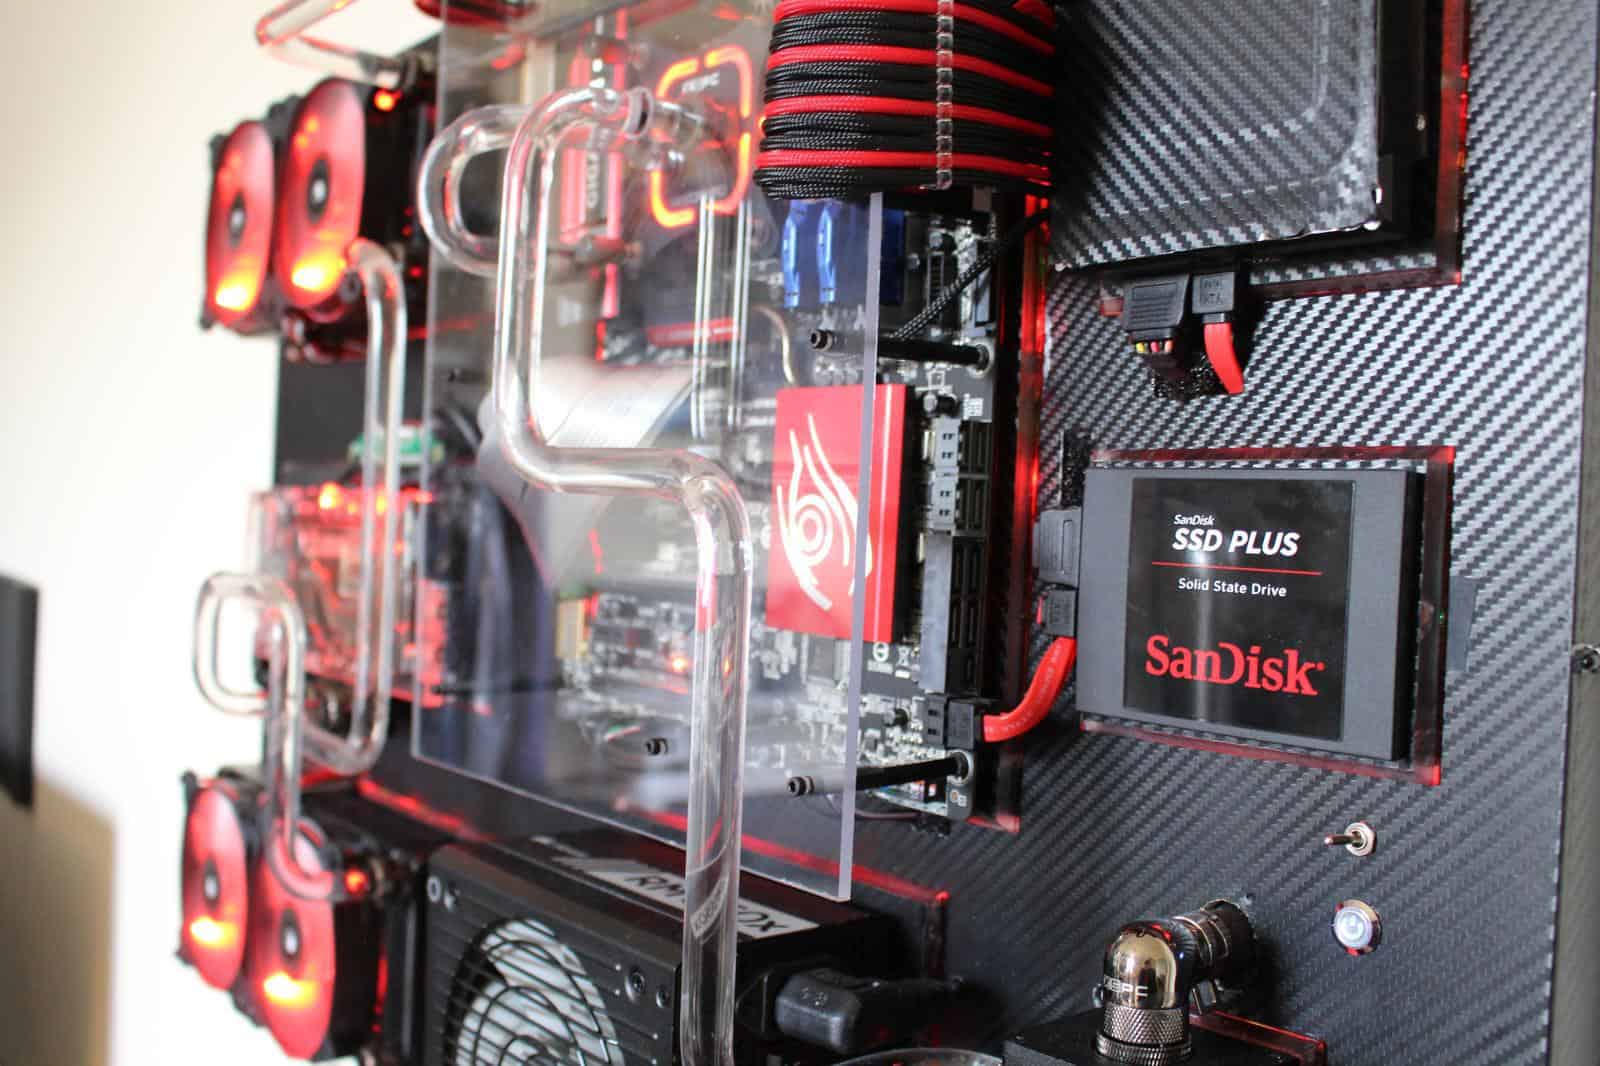 Fantastic Wall Mounted Pcs From Around The Internet 2020 Wepc Let S Build Your Dream Gaming Pc